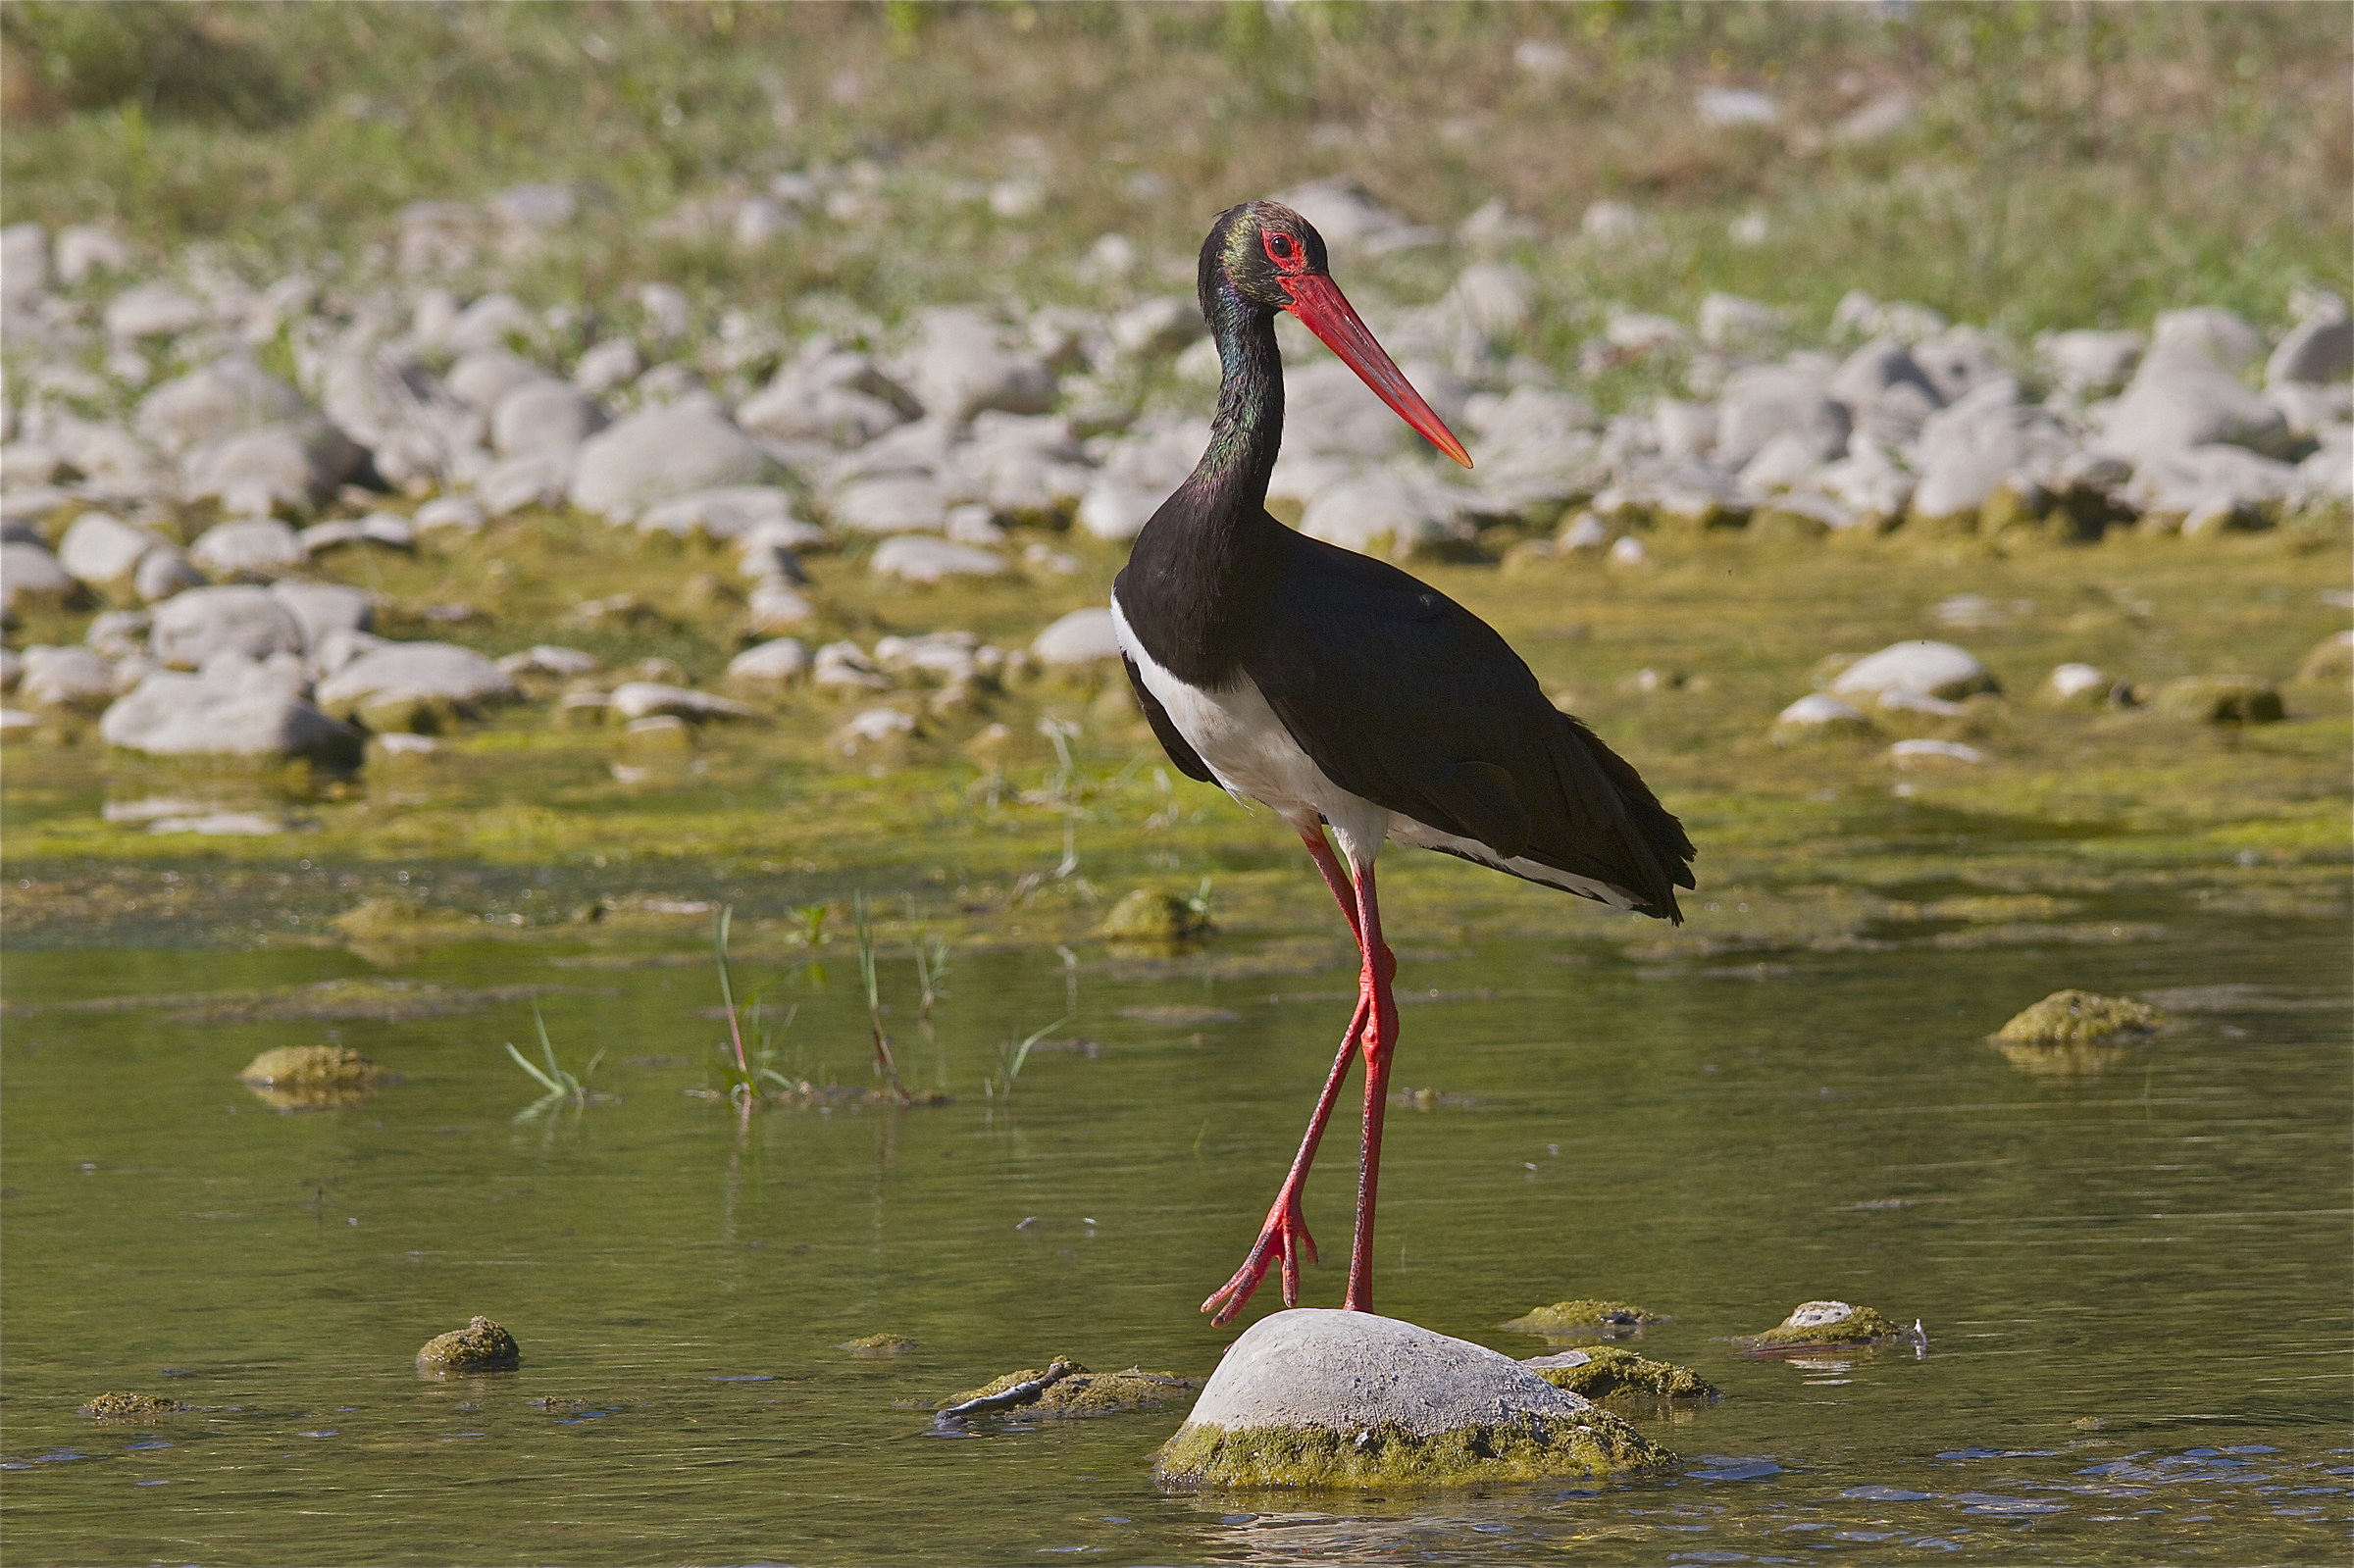 Black Stork in shallow water...